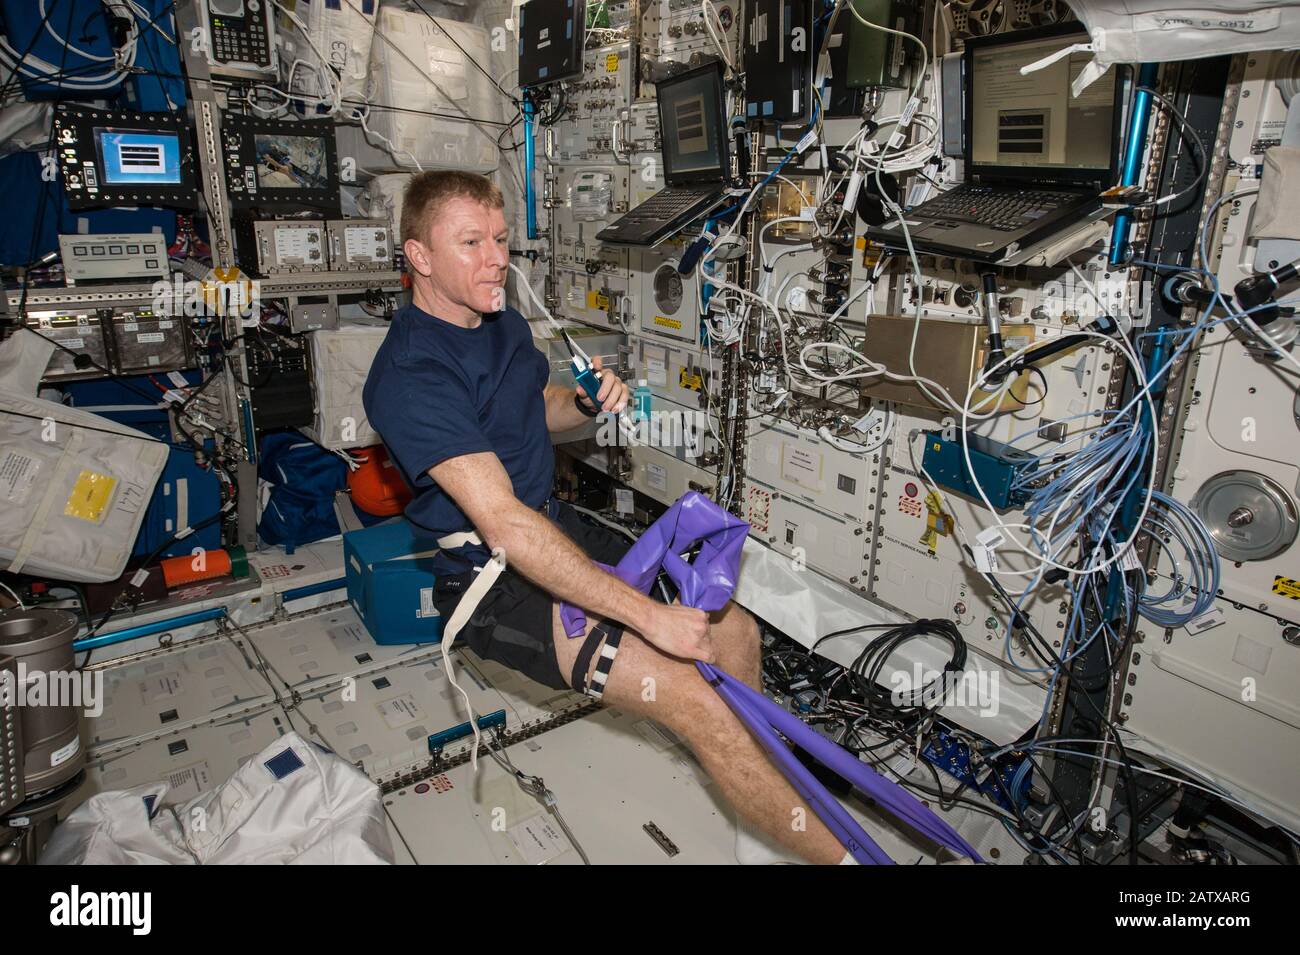 ISS - 30 May 2016 - ESA (European Space Agency) astronaut Tim Peake uses hardware for the Vascular Echo experiment. As humans get older on Earth, arte Stock Photo